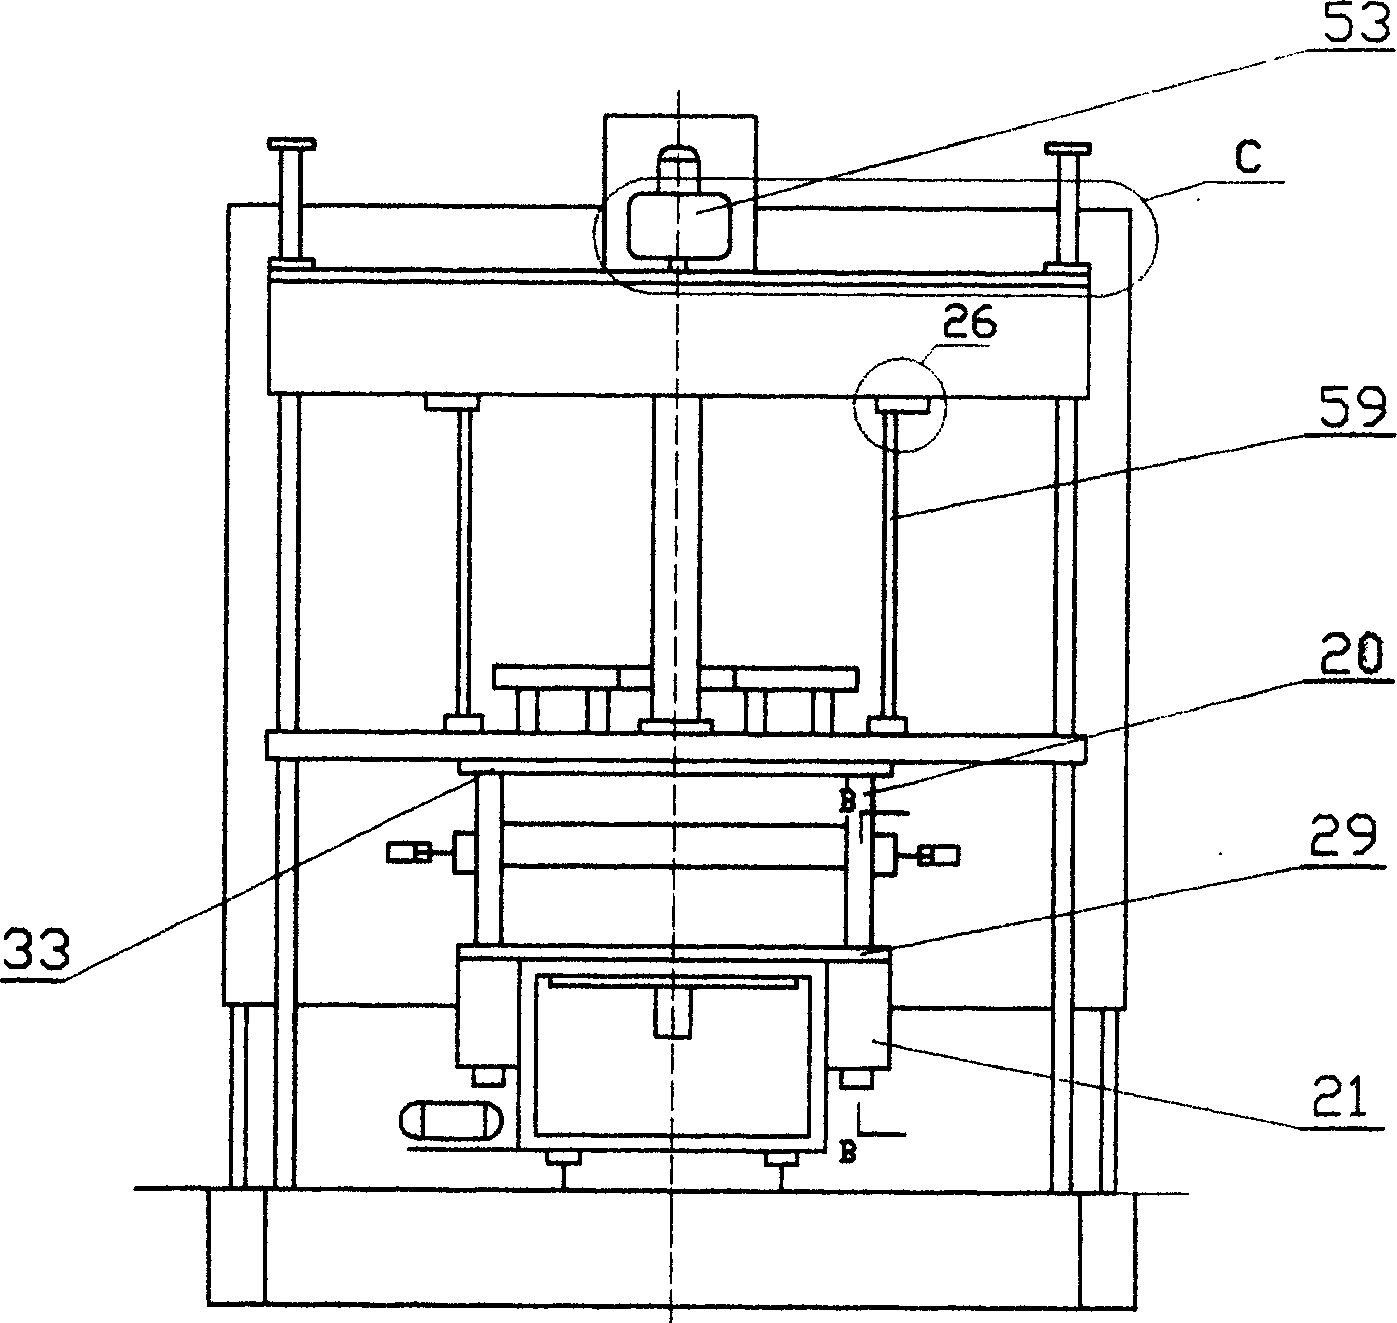 Super large-scale plastic injection moulding process and apparatus